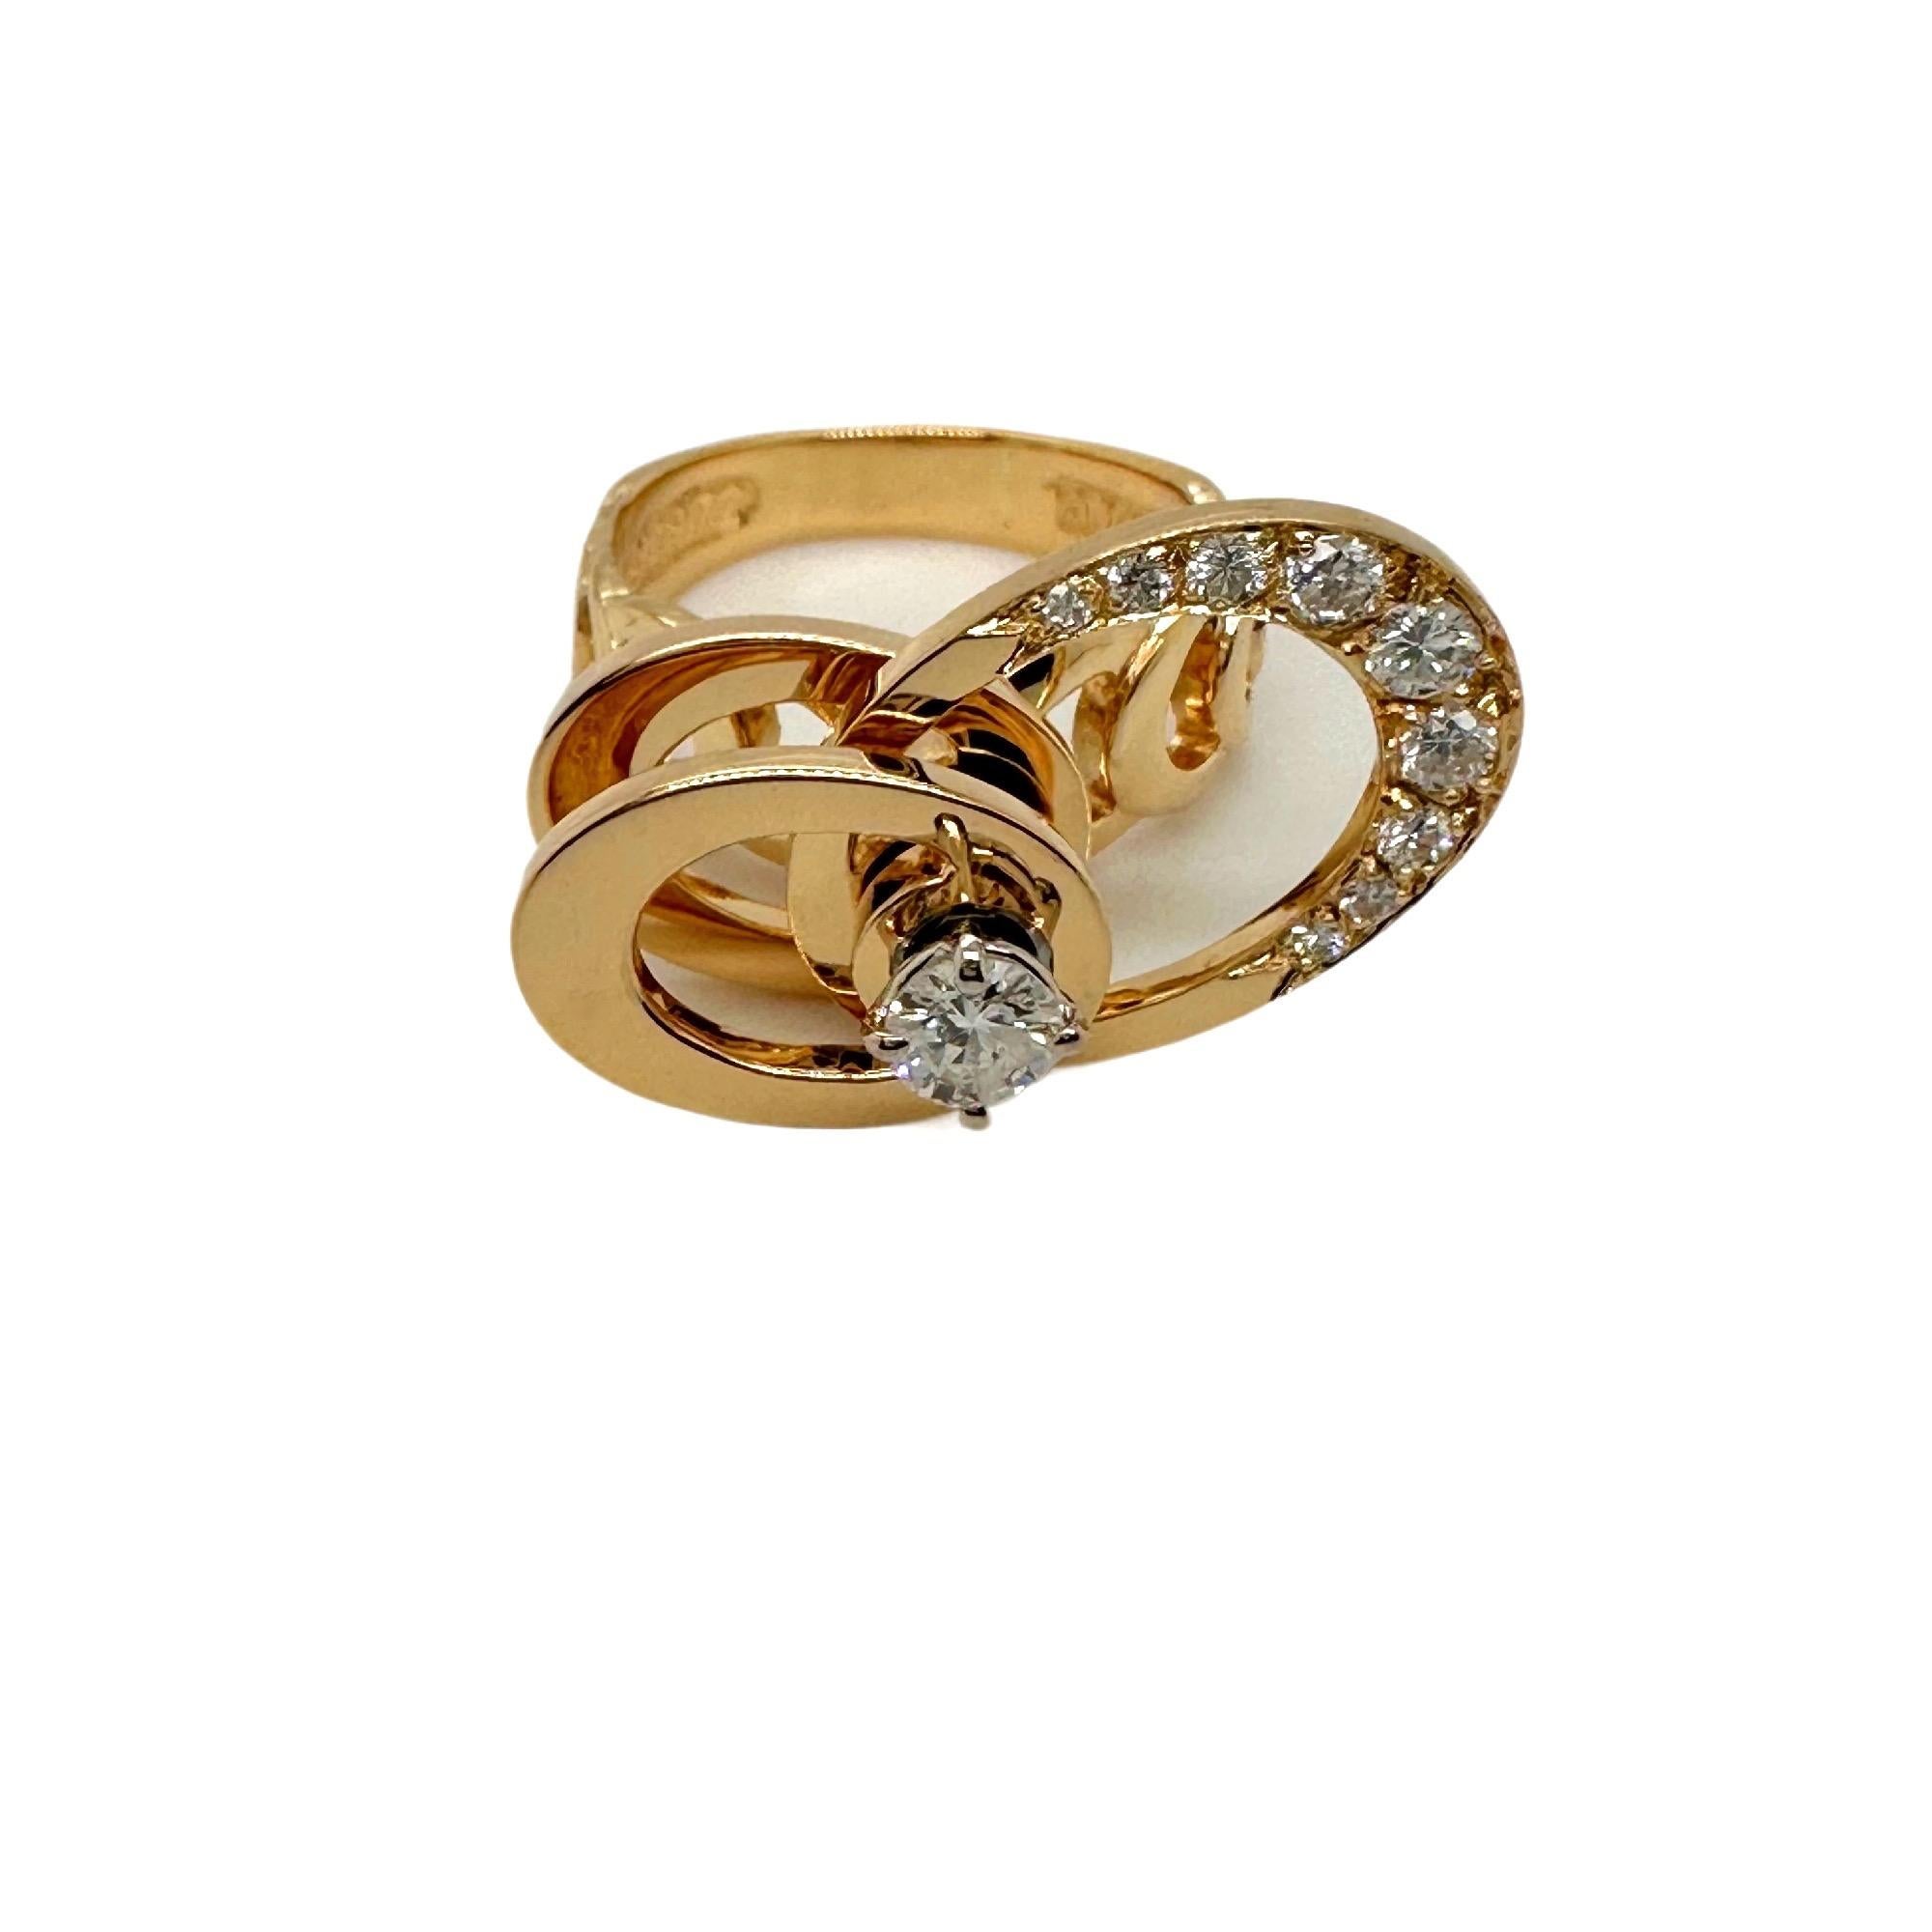 Women's or Men's Norman Teufel Spinning 3 Tier in Motion Diamond Ring 18kt Yellow Gold circa 1972